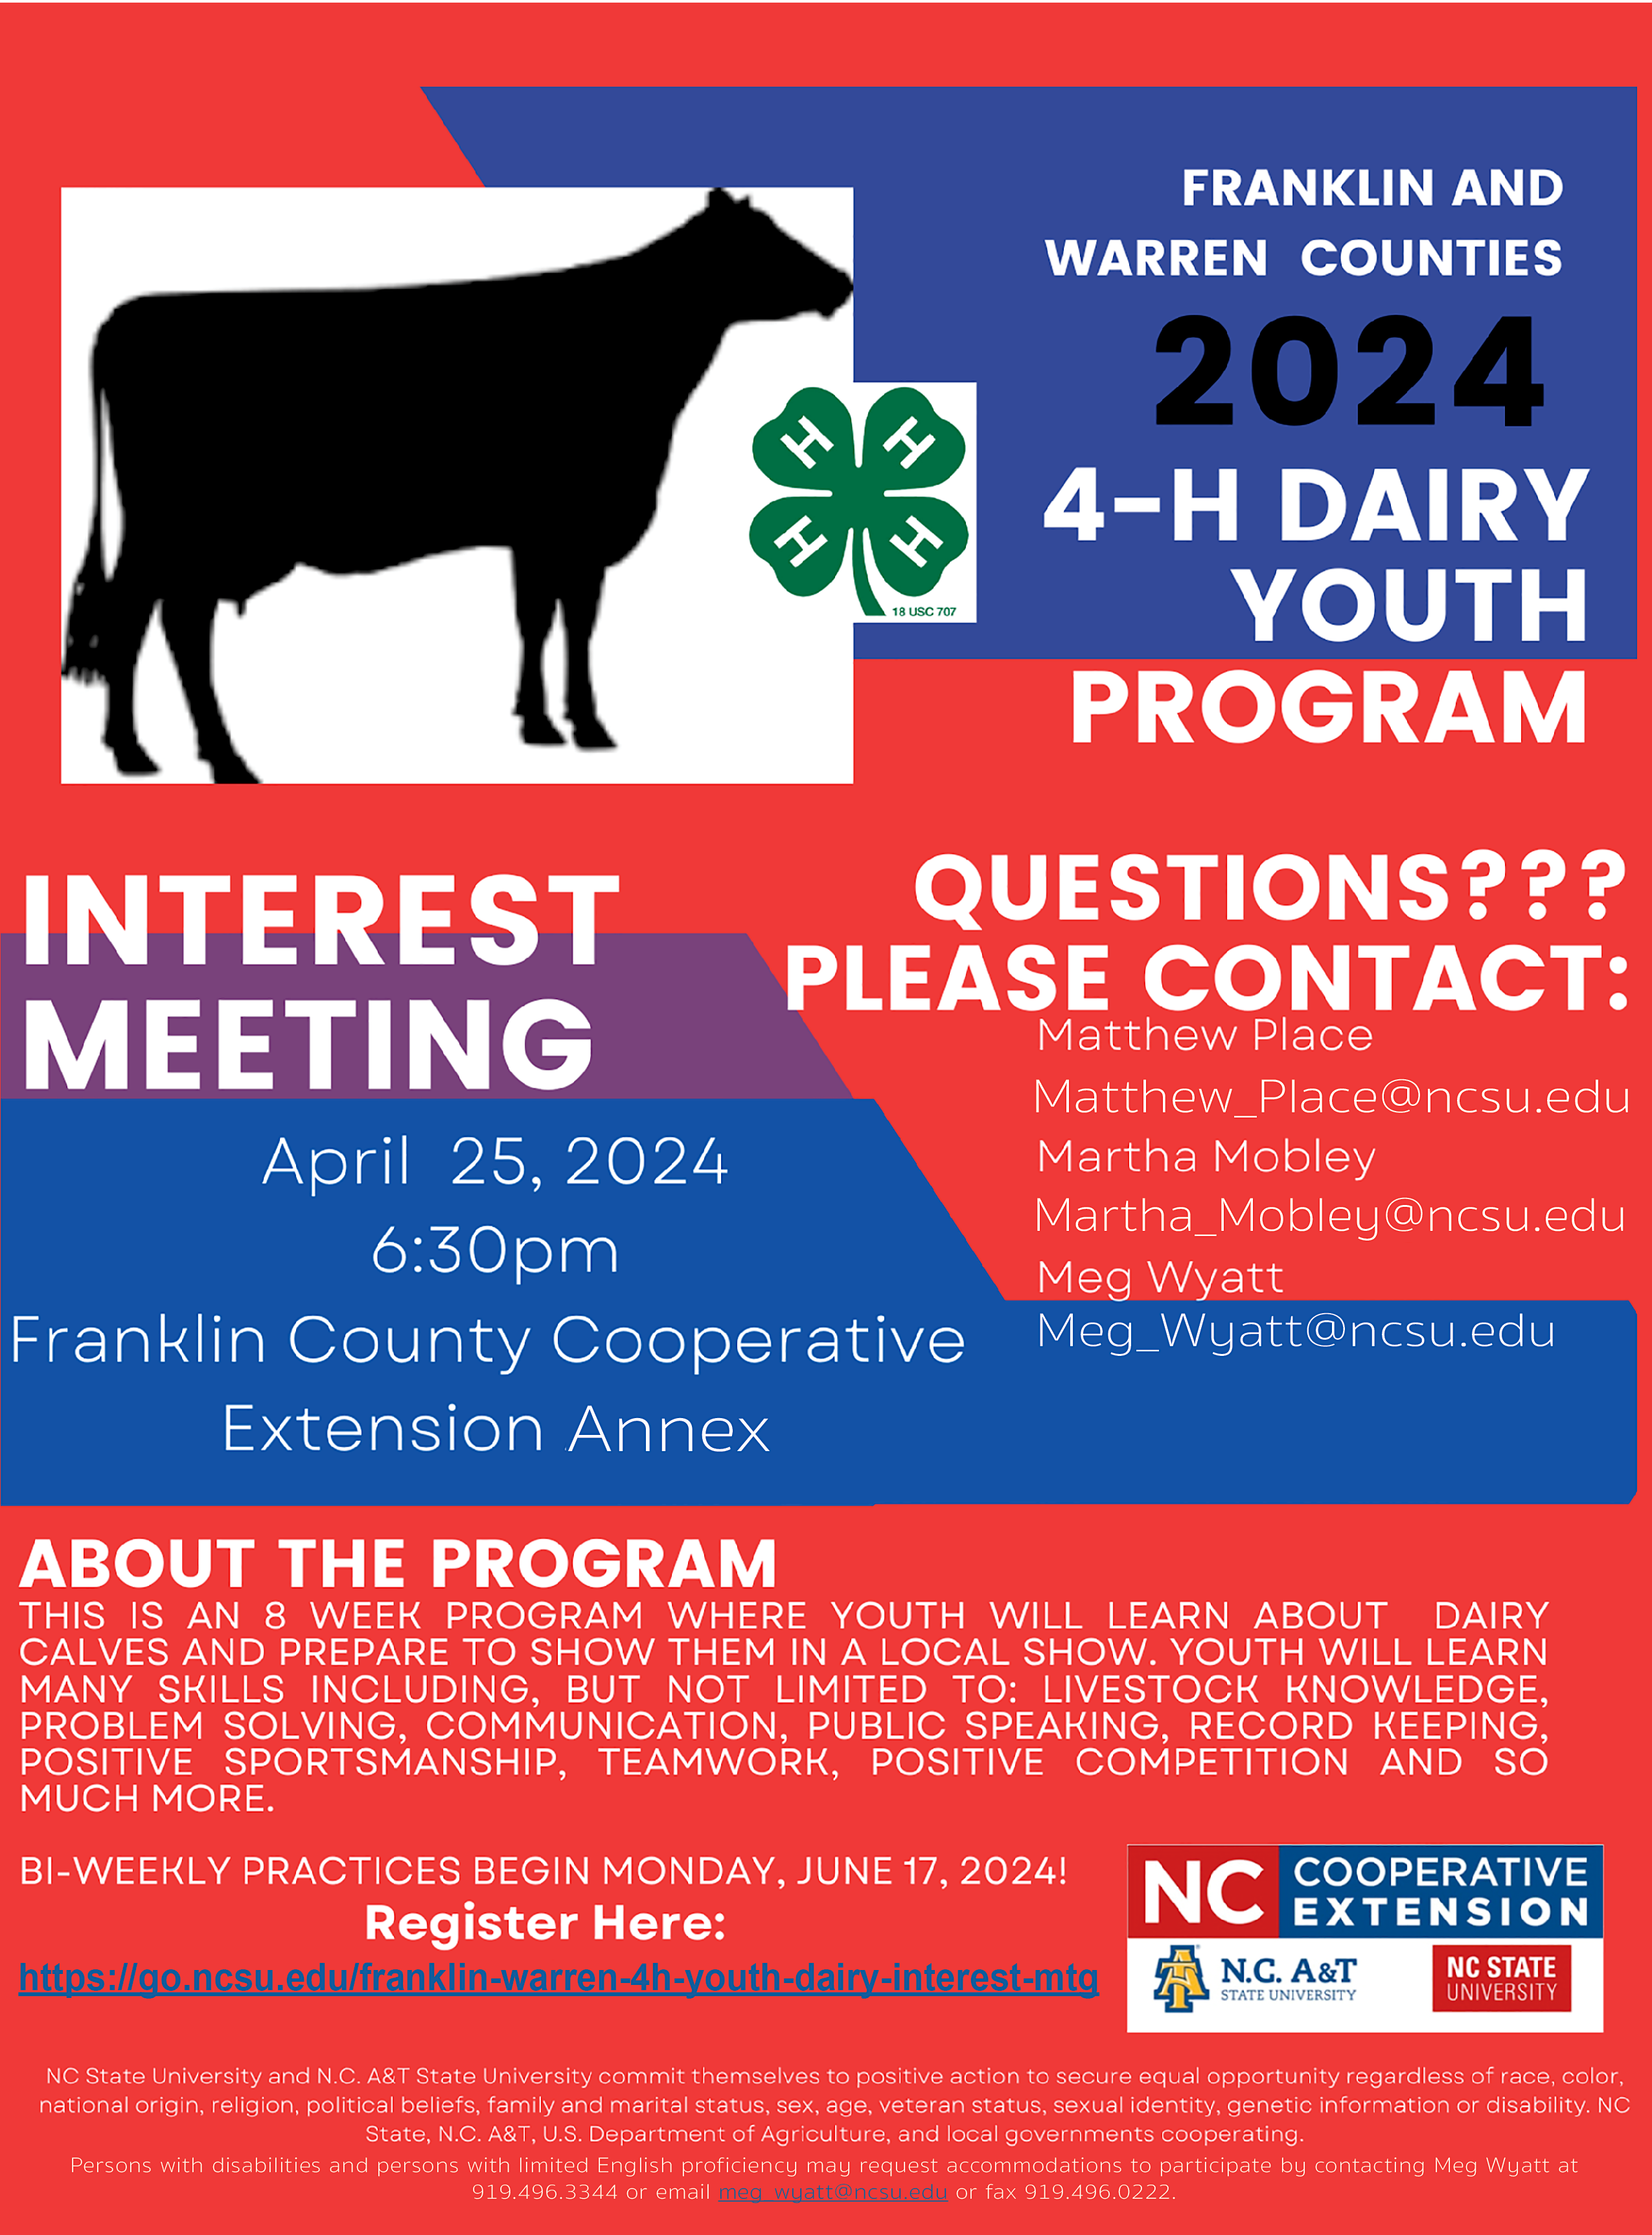 Franklin and Warren Dairy Youth Program flier interest meeting informational with location, date, time, registration info.